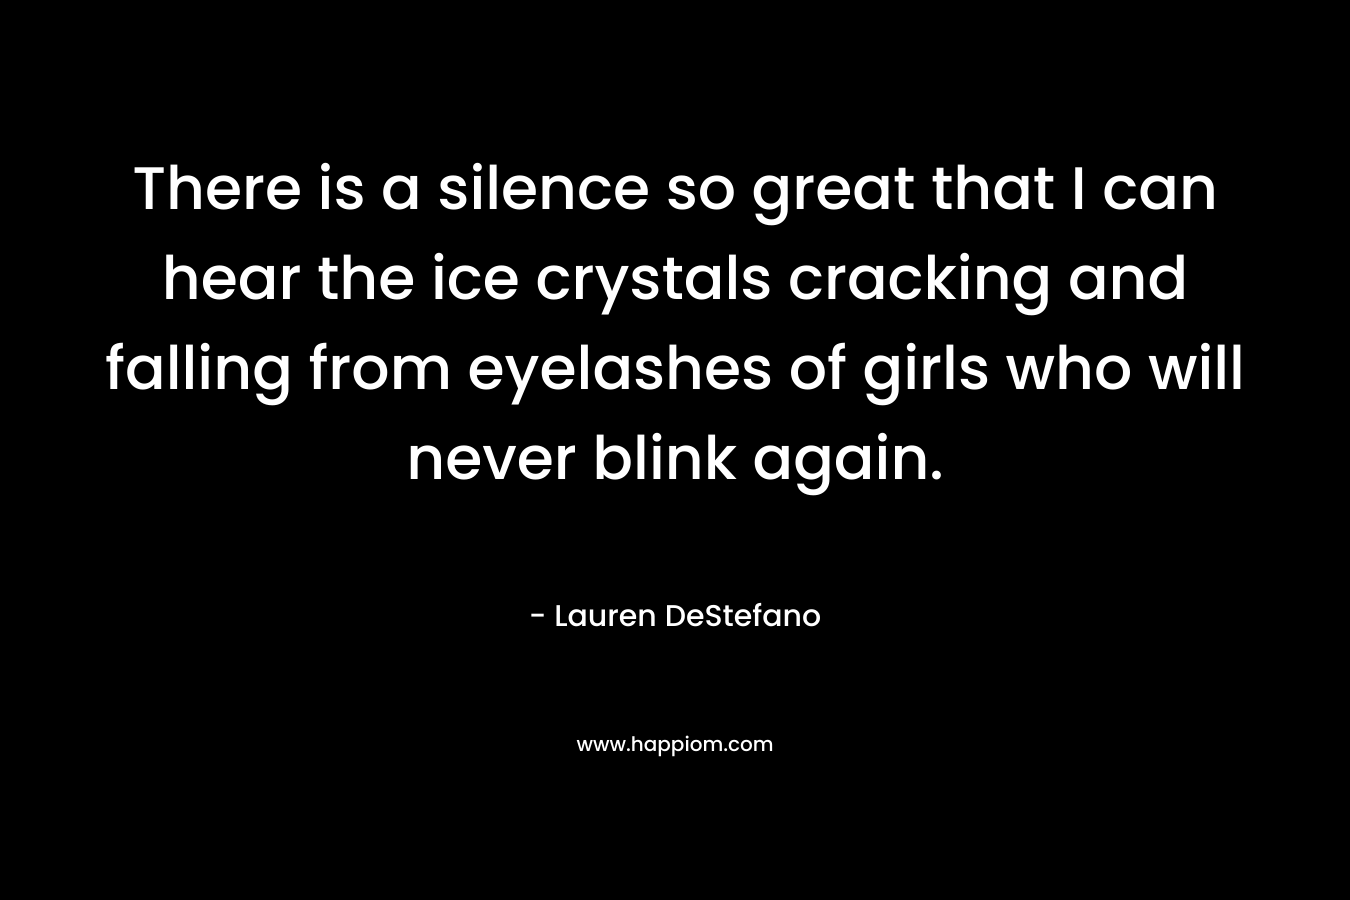 There is a silence so great that I can hear the ice crystals cracking and falling from eyelashes of girls who will never blink again.